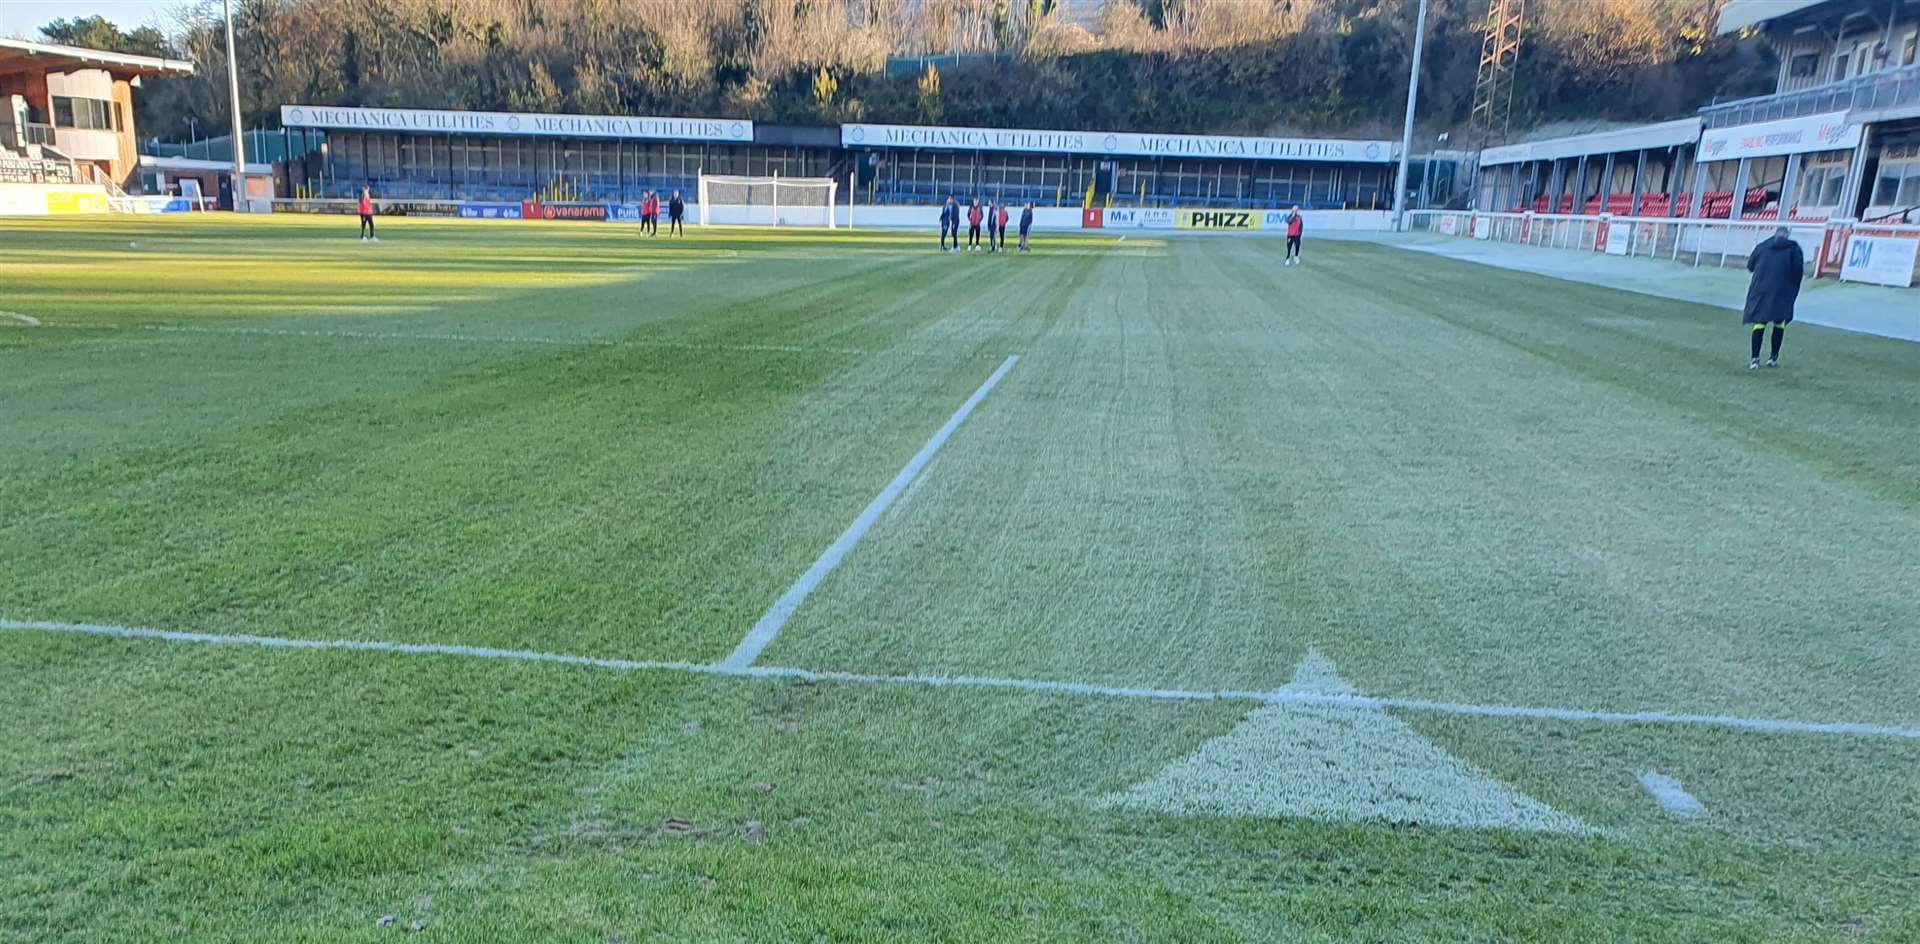 The scene at Crabble last Saturday as Dover's scheduled match against Worthing was called off